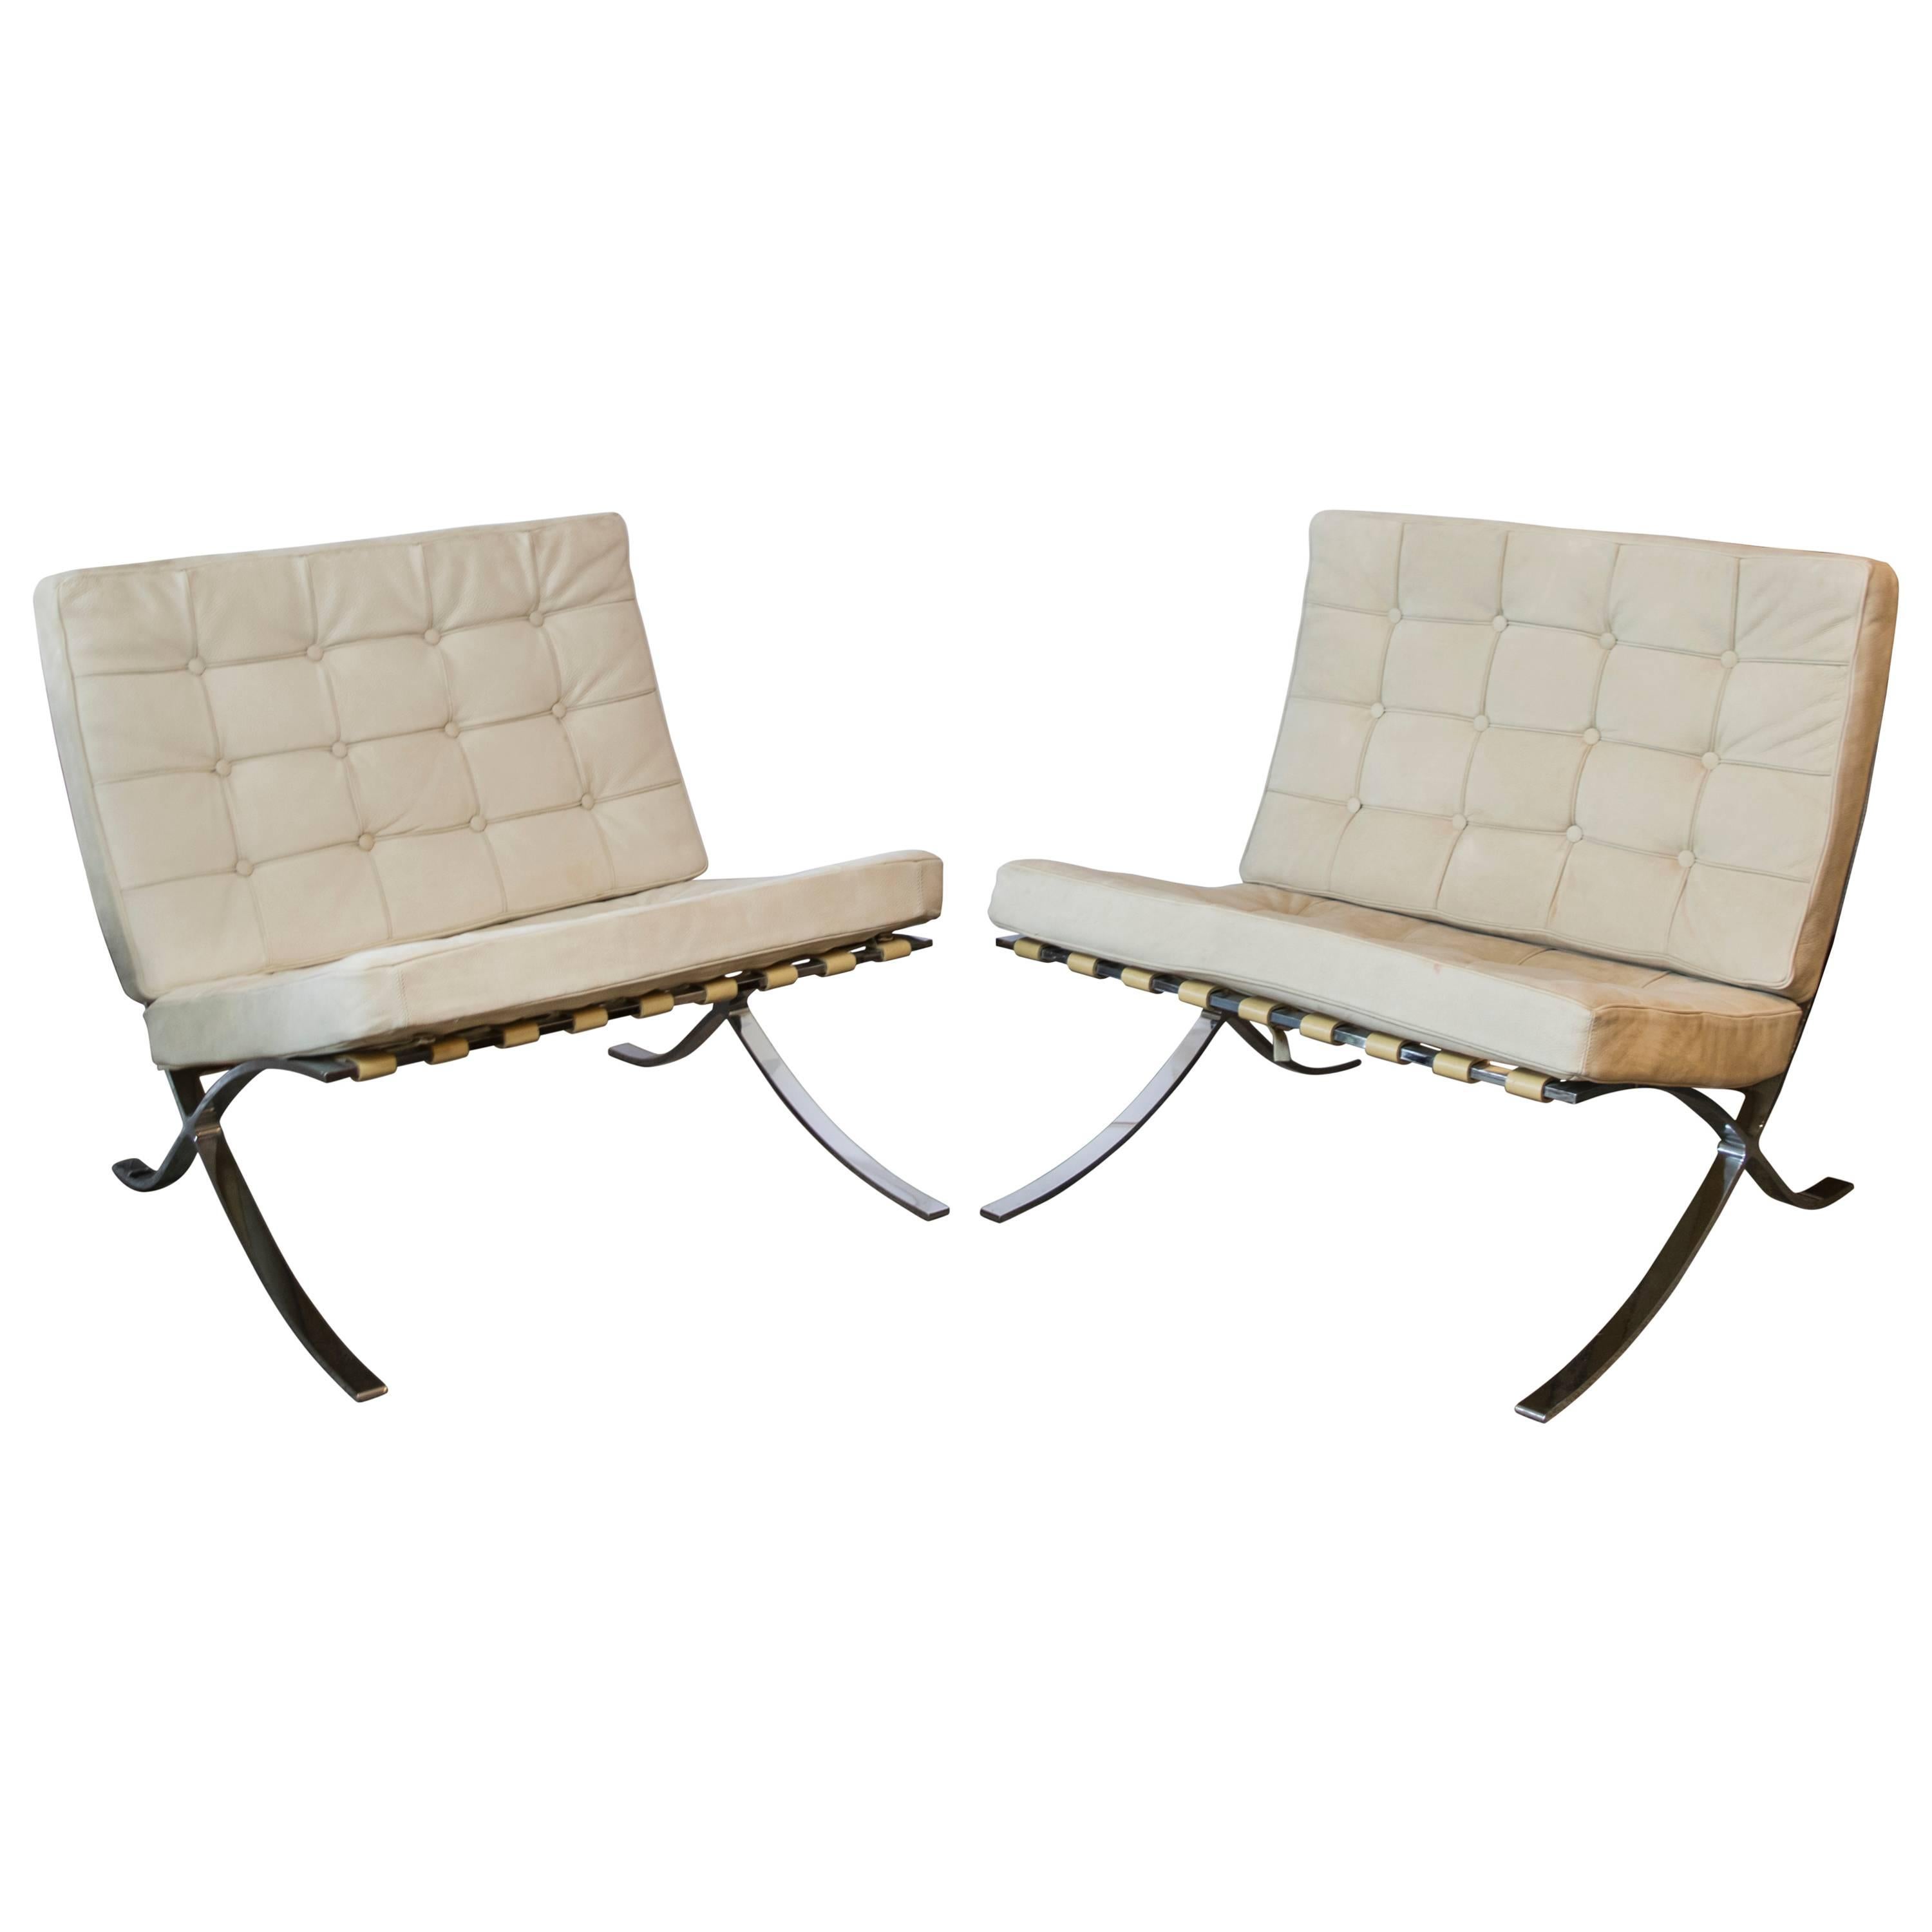 Mies van der Rohe Barcelona Chairs in Highest Quality Nubuck Leather